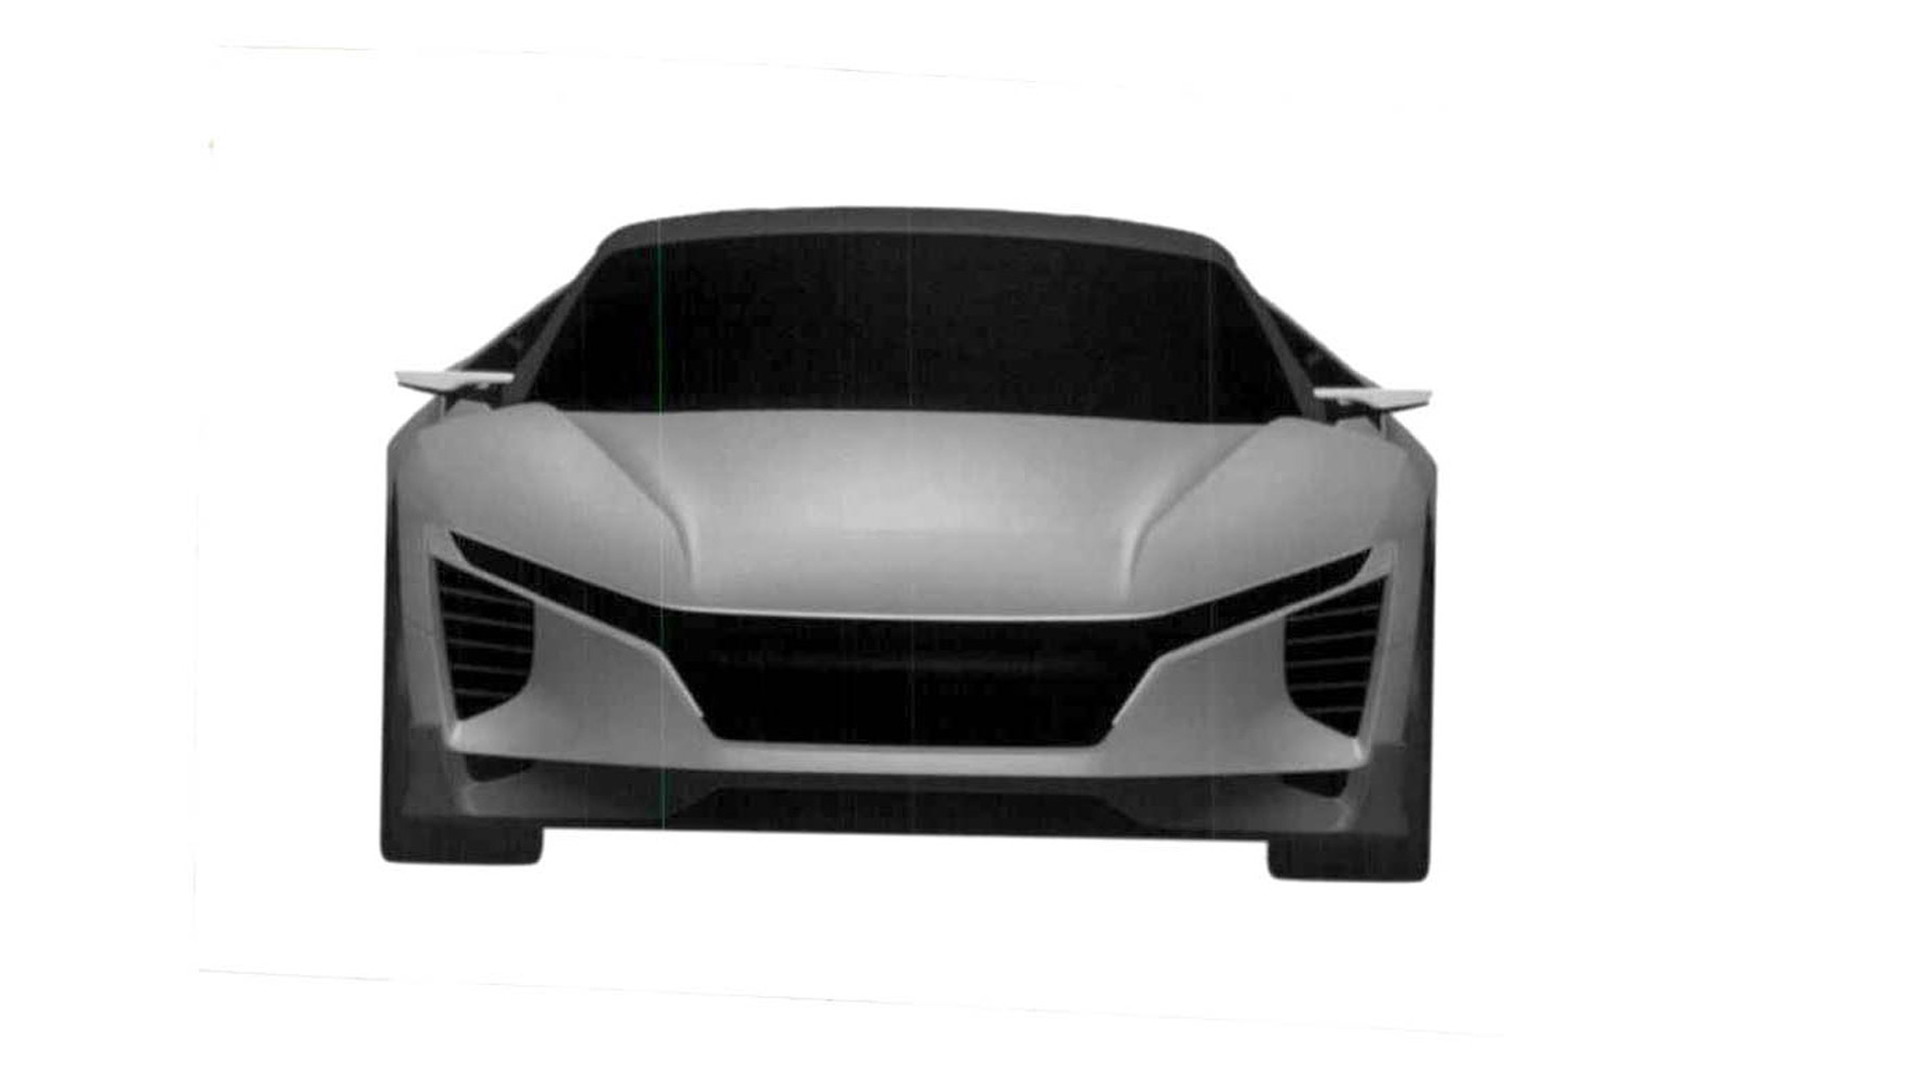 Patent drawing for mid-engine sports car filed by Honda - Image via Autovisie